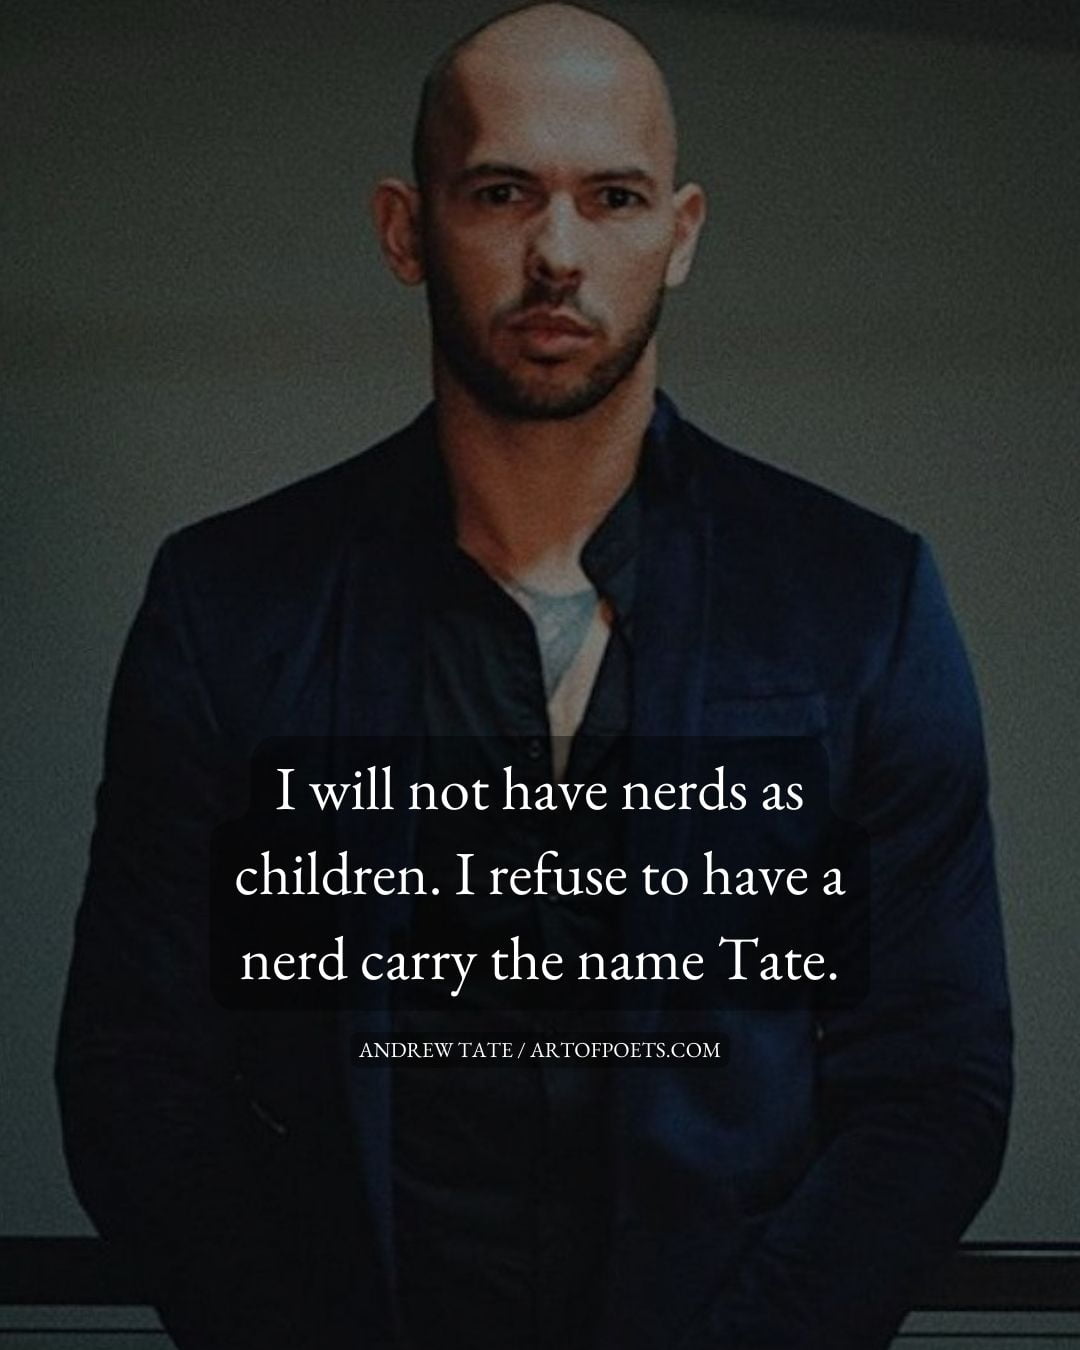 I will not have nerds as children. I refuse to have a nerd carry the name Tate